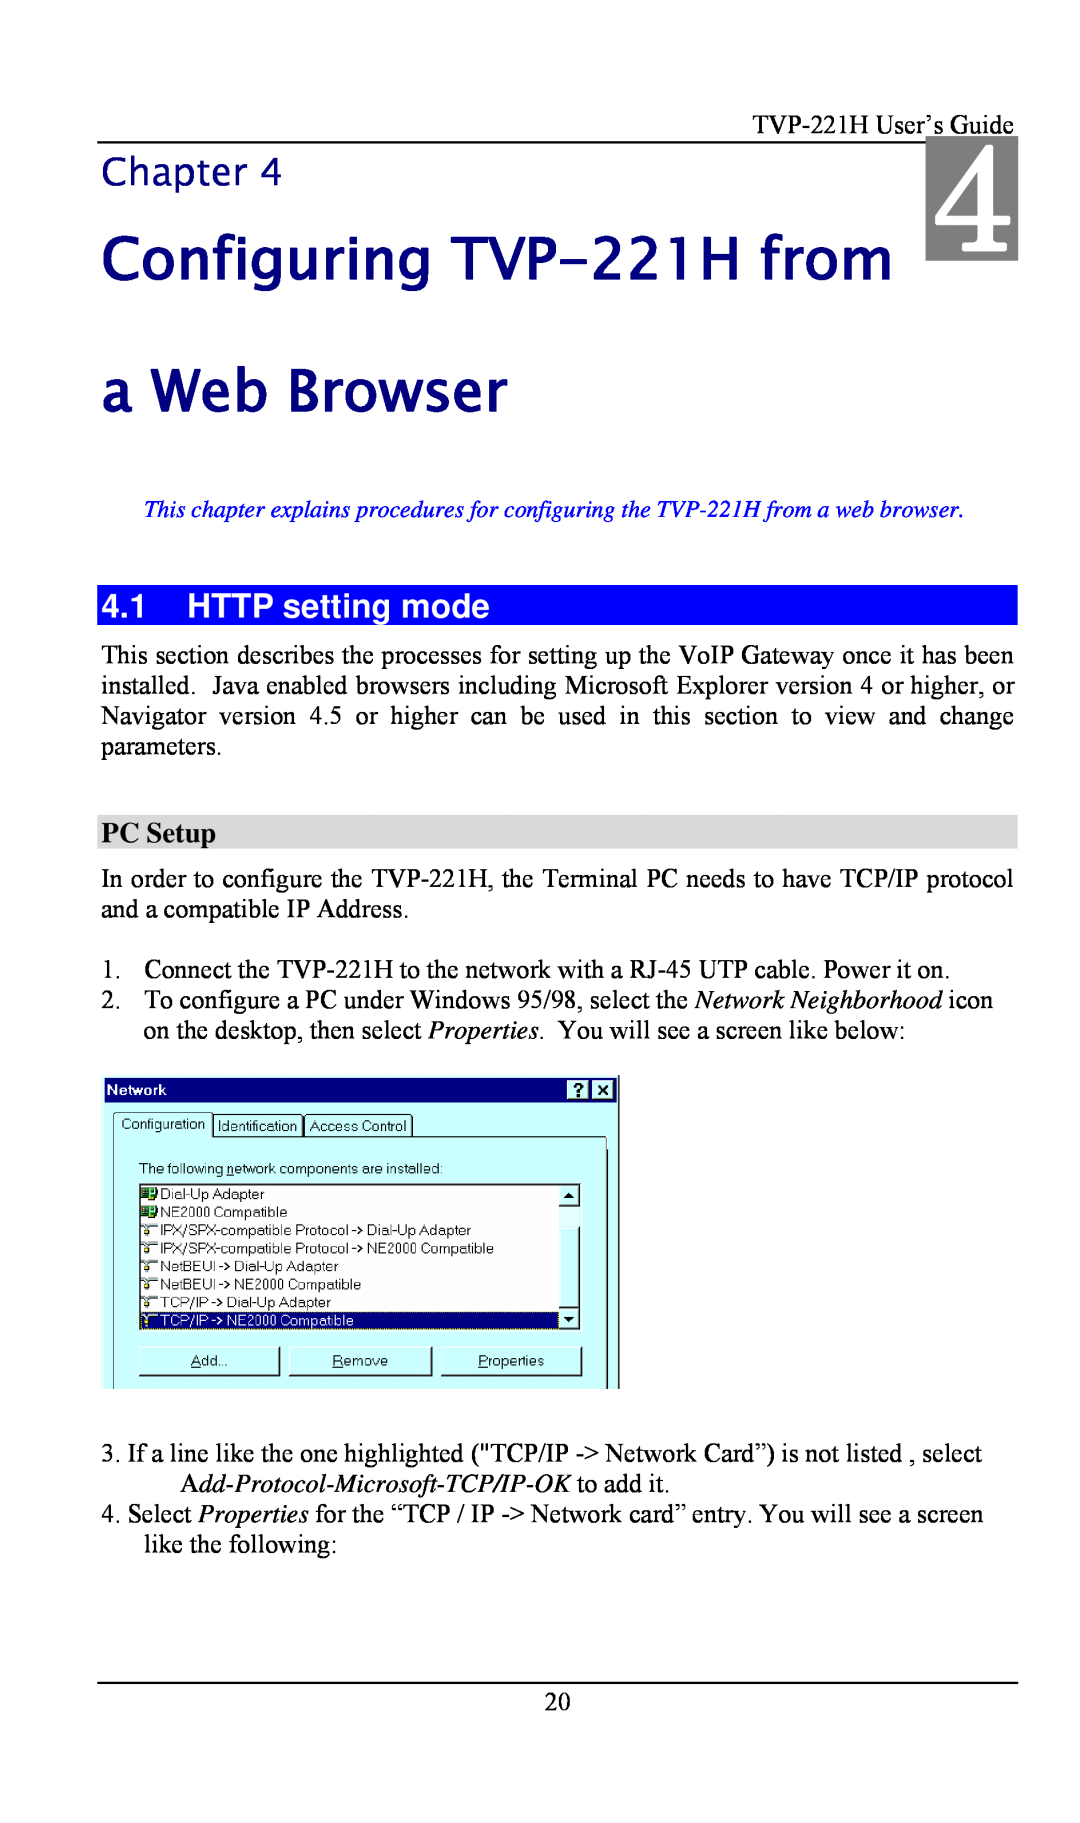 TRENDnet TVP- 221H, VoIP Gateway manual Configuring TVP-221H from a Web Browser, HTTP setting mode, PC Setup, Chapter 